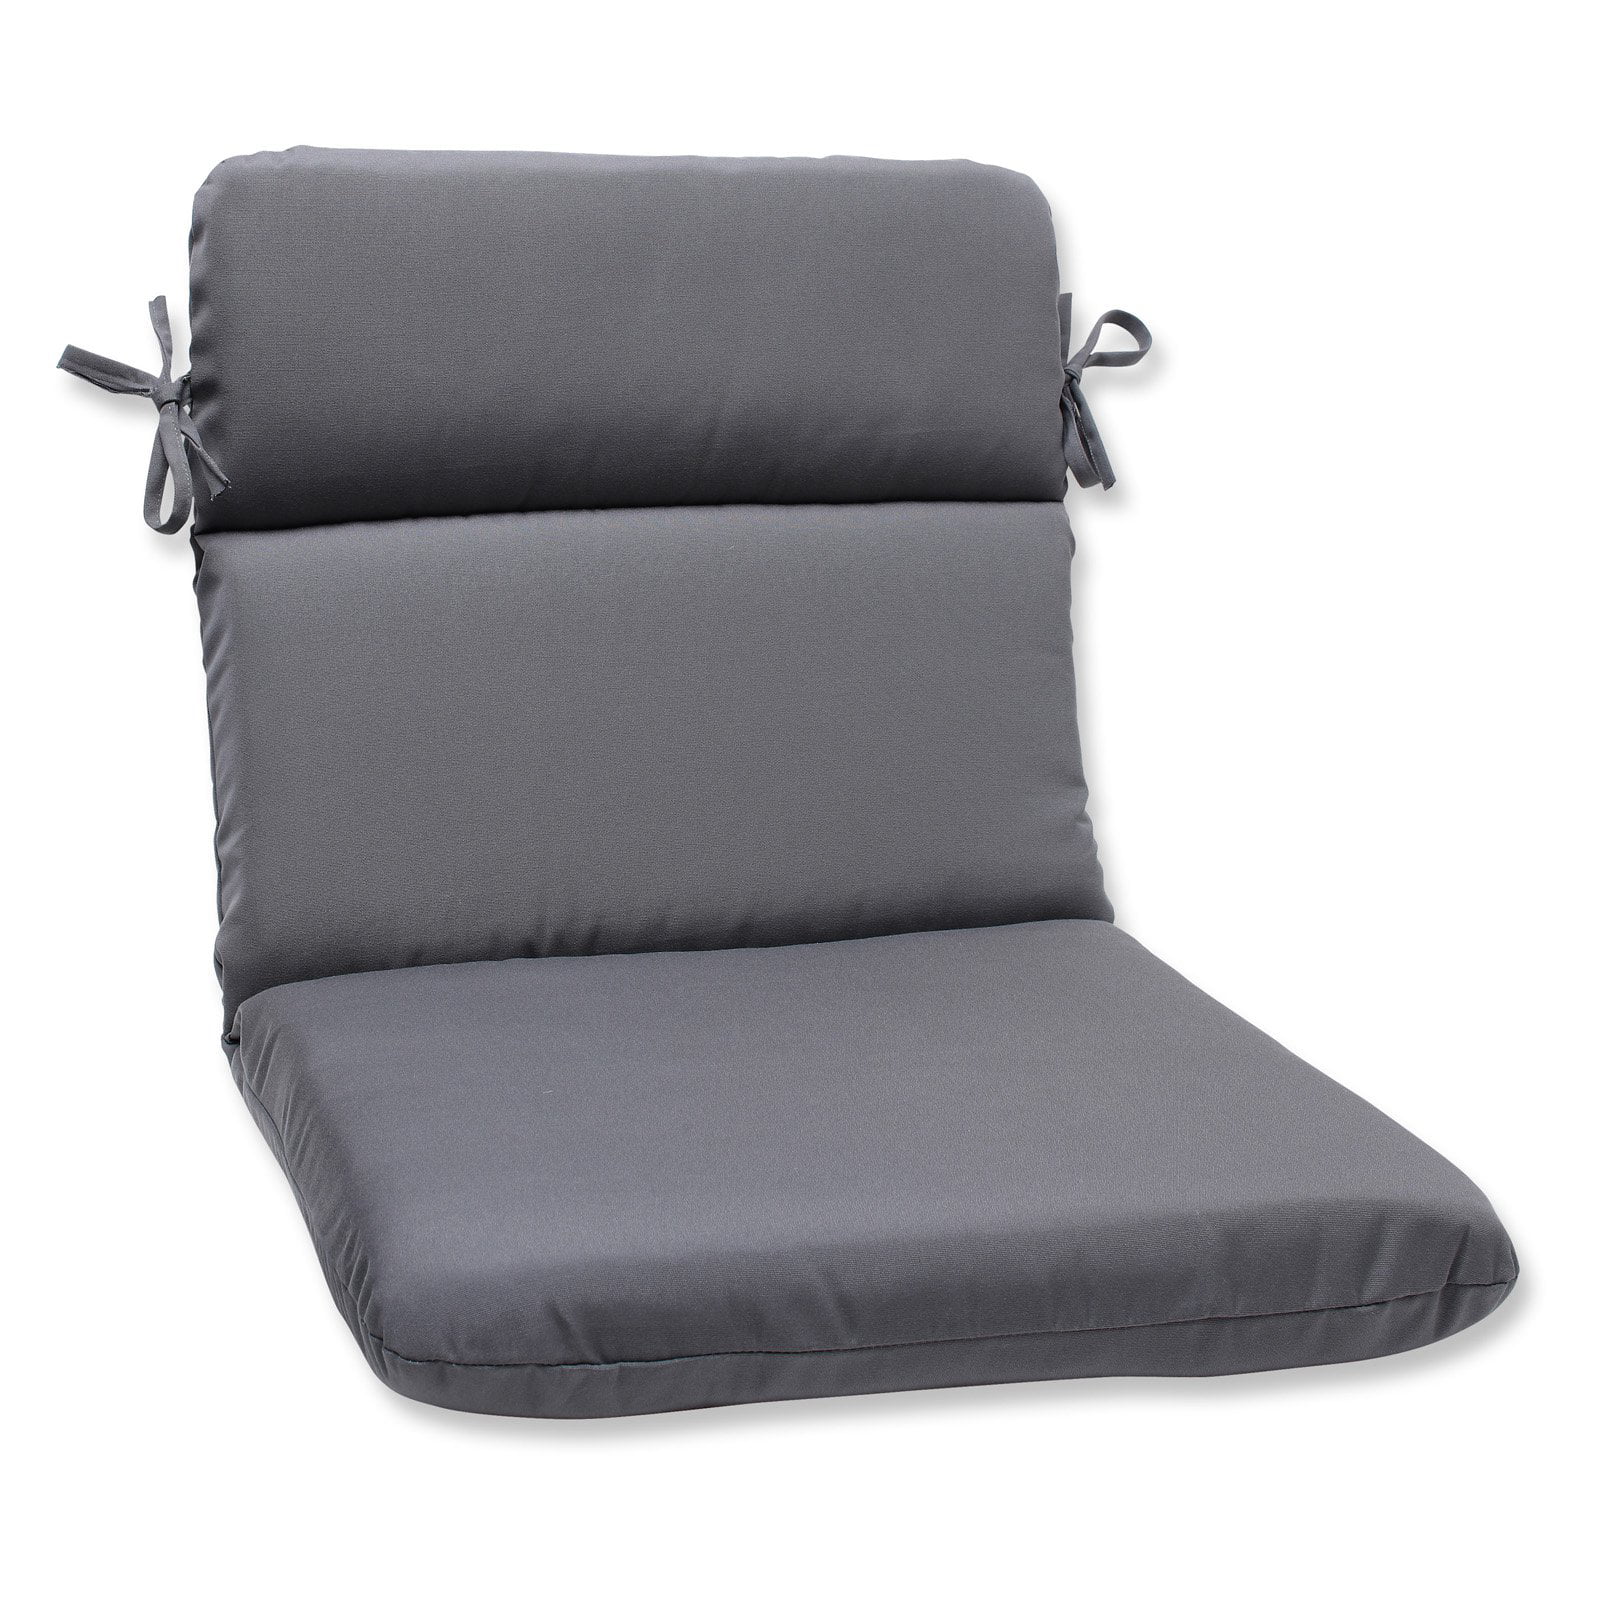 40.5 Tweed Gray Outdoor Patio Rounded Corner Chair Cushions